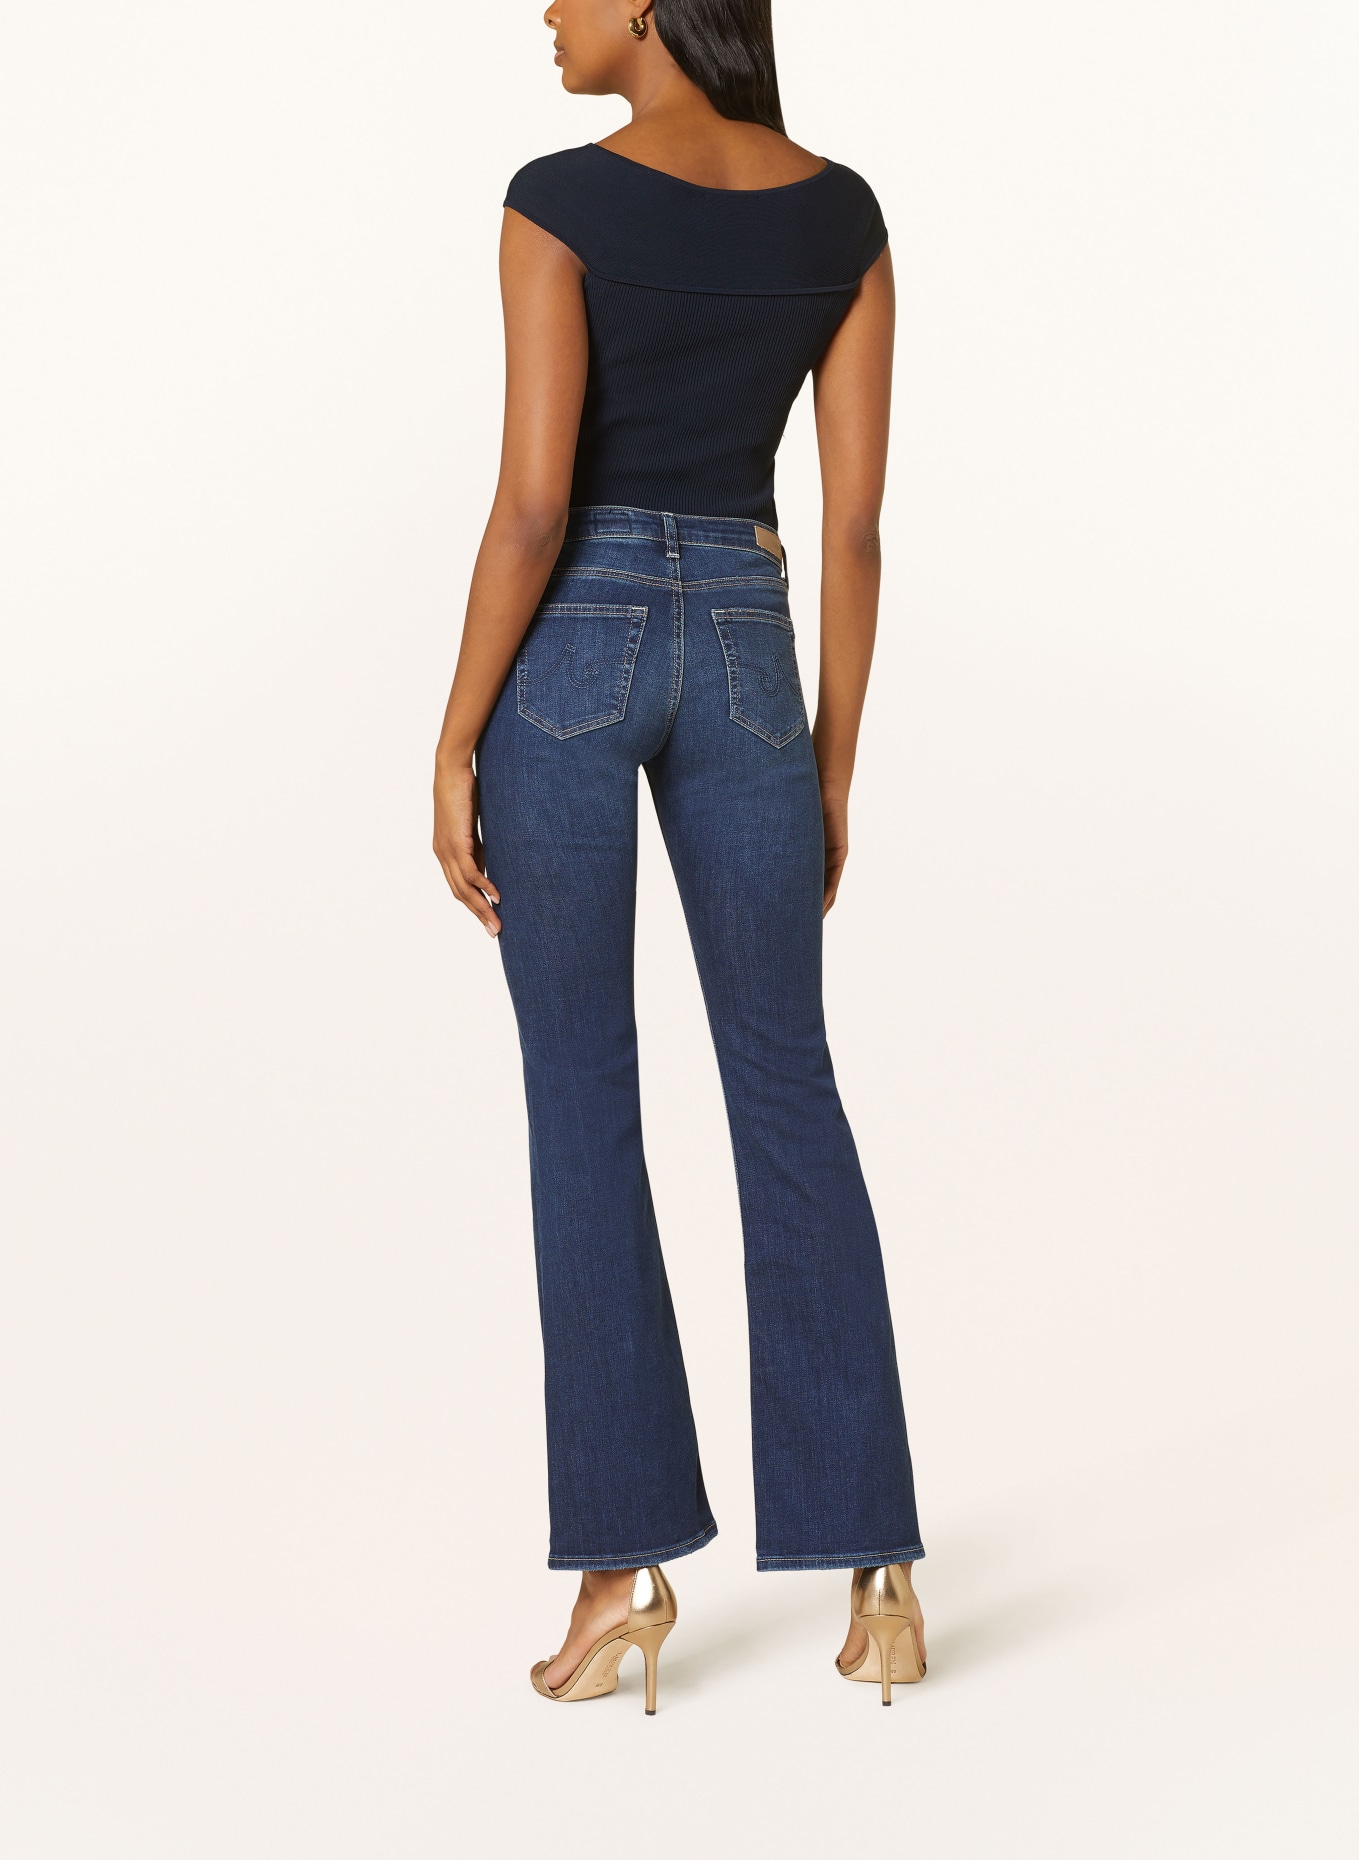 MICHAEL KORS Knit body, Color: 409 MIDNIGHT BLUE (Image 3)